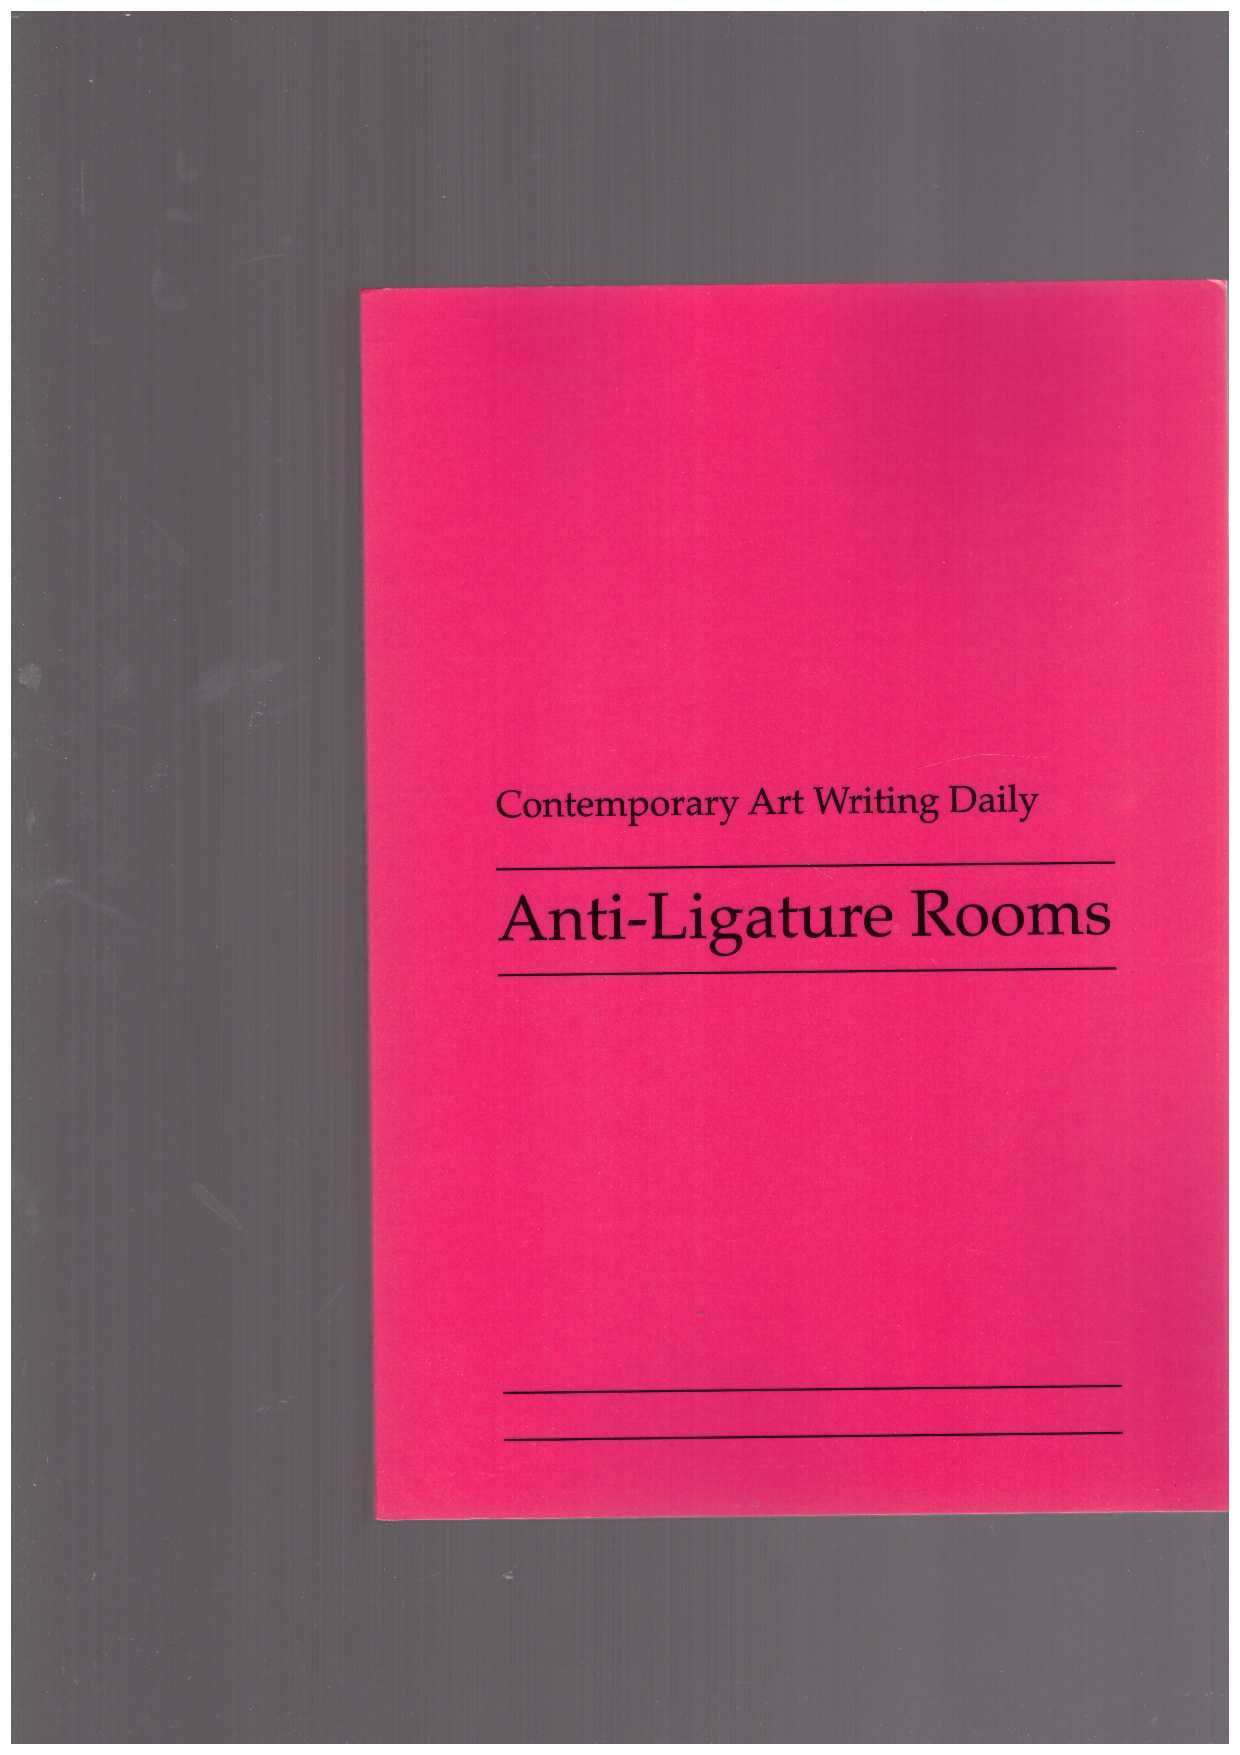 Contemporary Art Writing Daily - Anti-Ligature Rooms